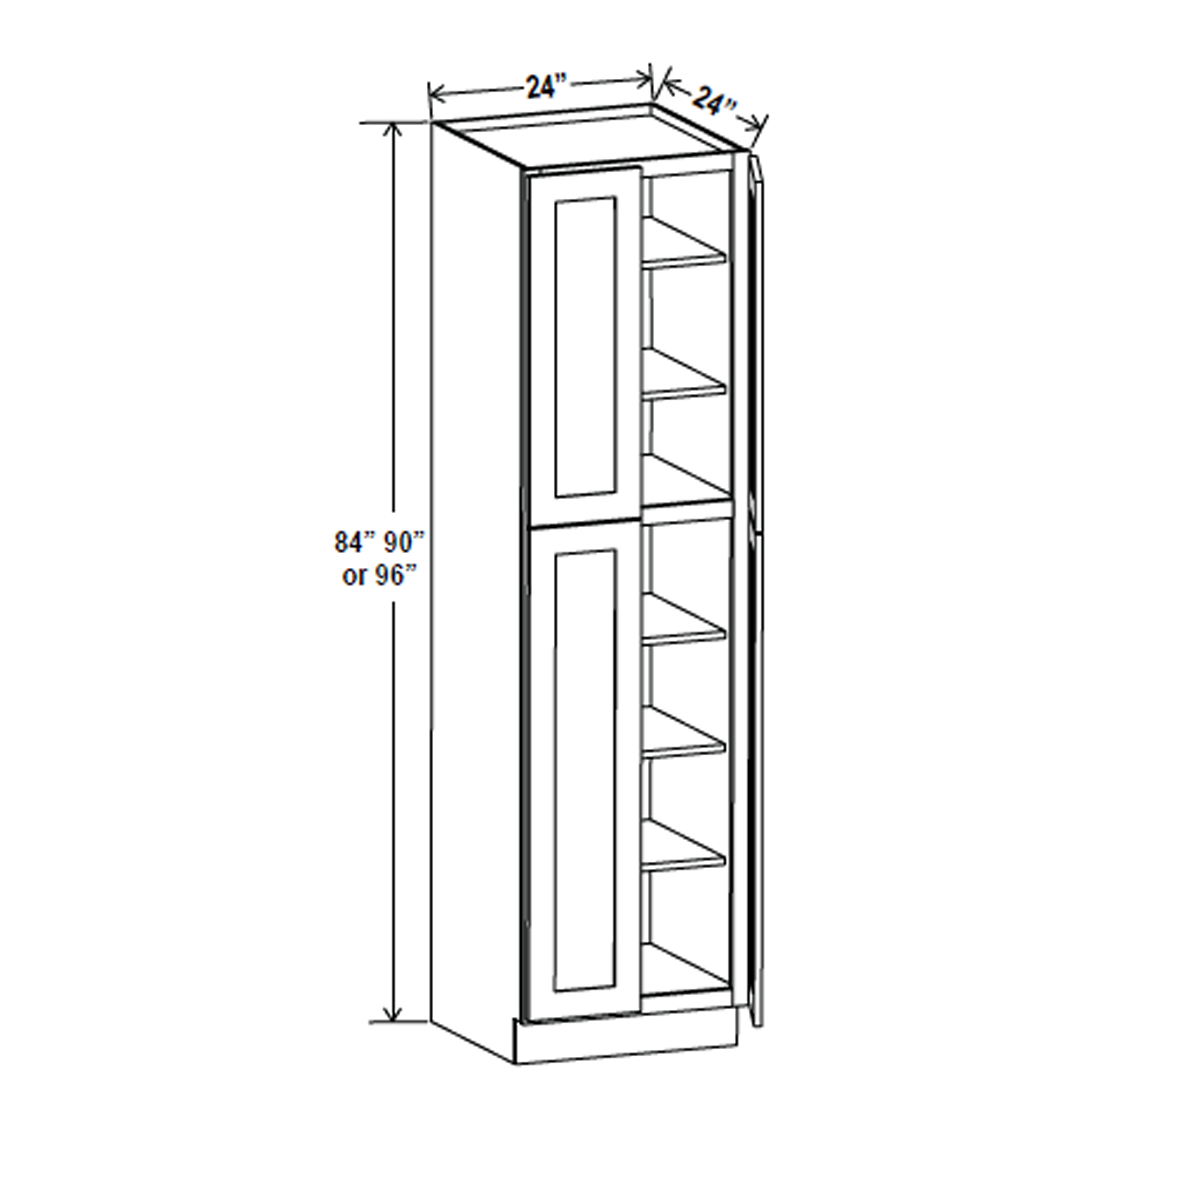 Wall Pantry Cabinet - 24W x 90H x 24D - Blue Shaker Cabinet